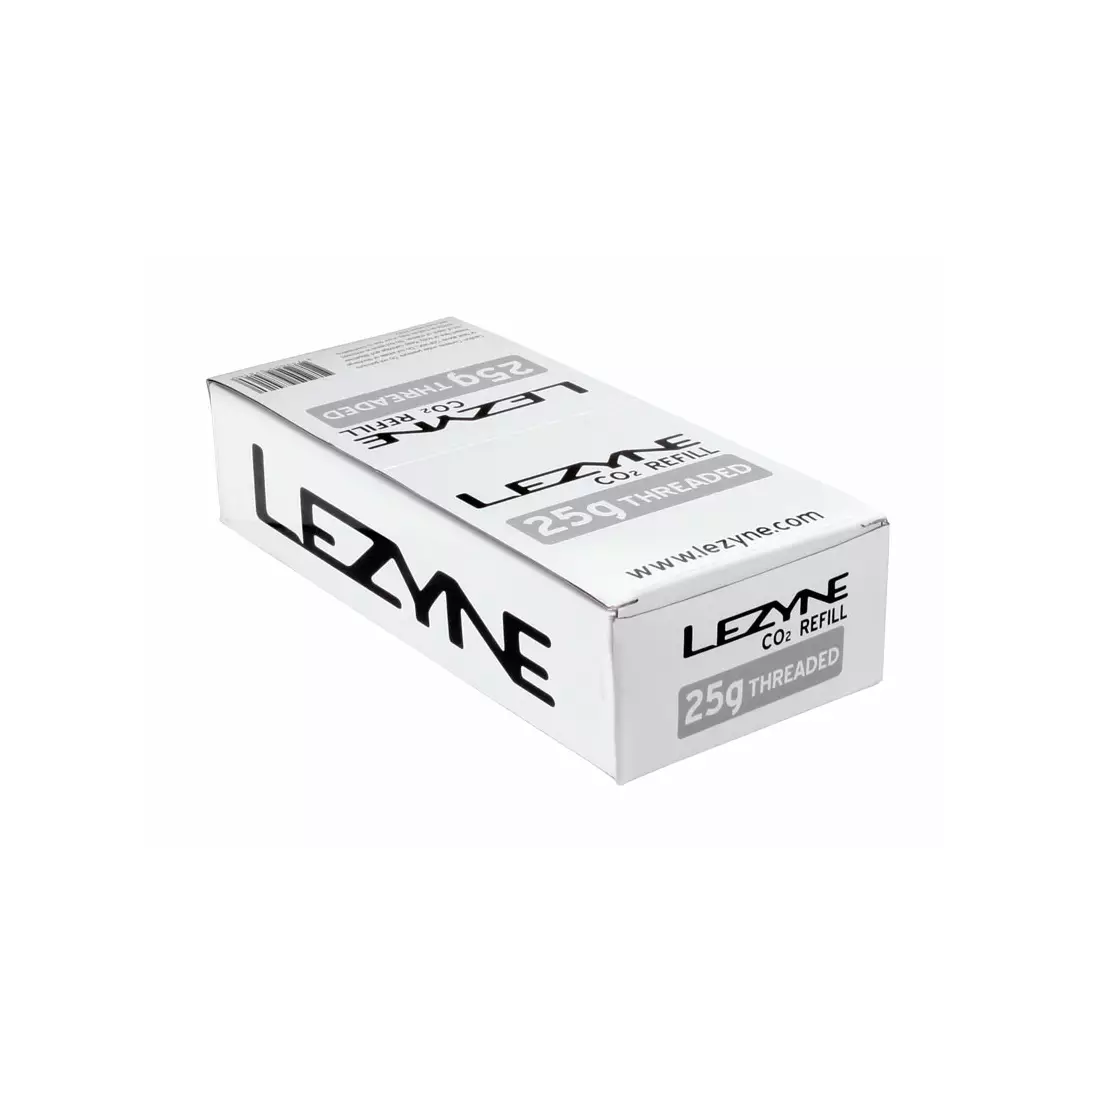 LEZYNE gas cartridge for bicycle pump threaded co2 25g 30 pieces LZN-1-C2-CRTDG-V225